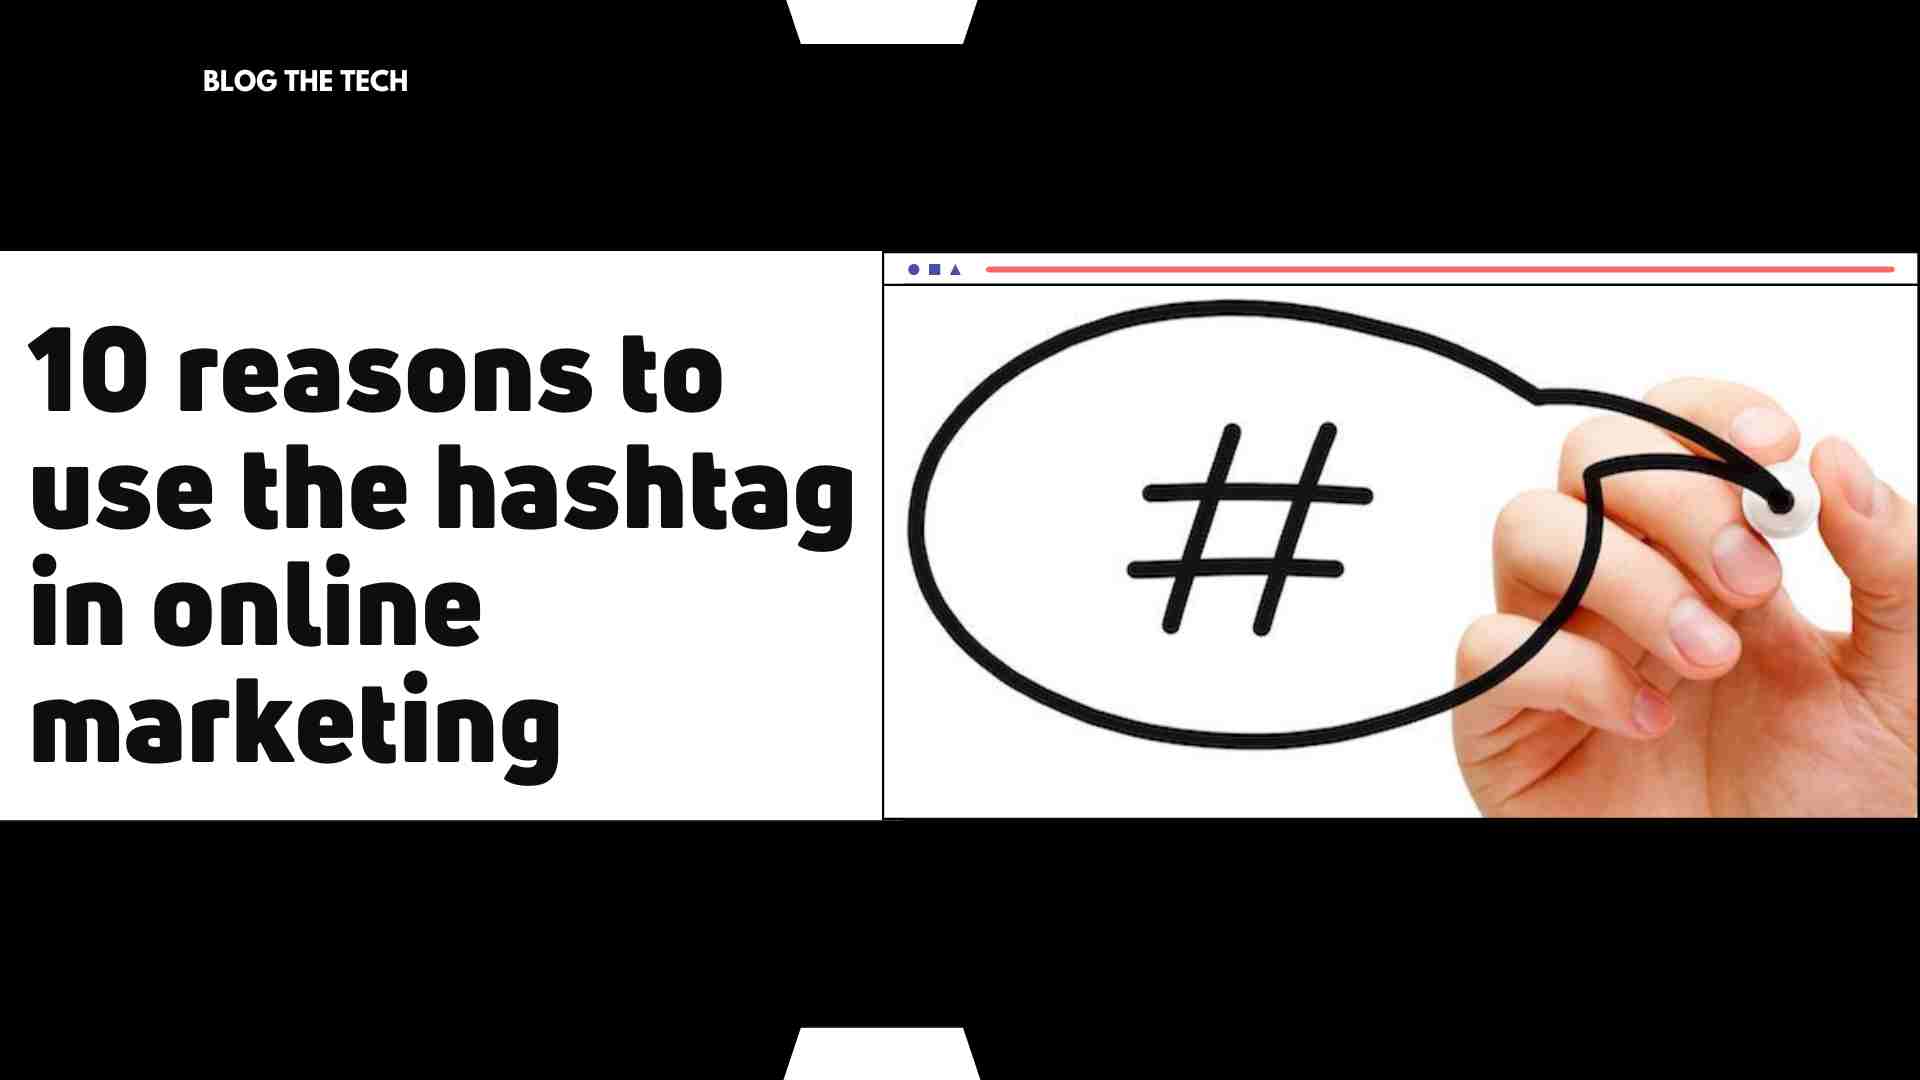 Reasons to use the hashtag in online marketing